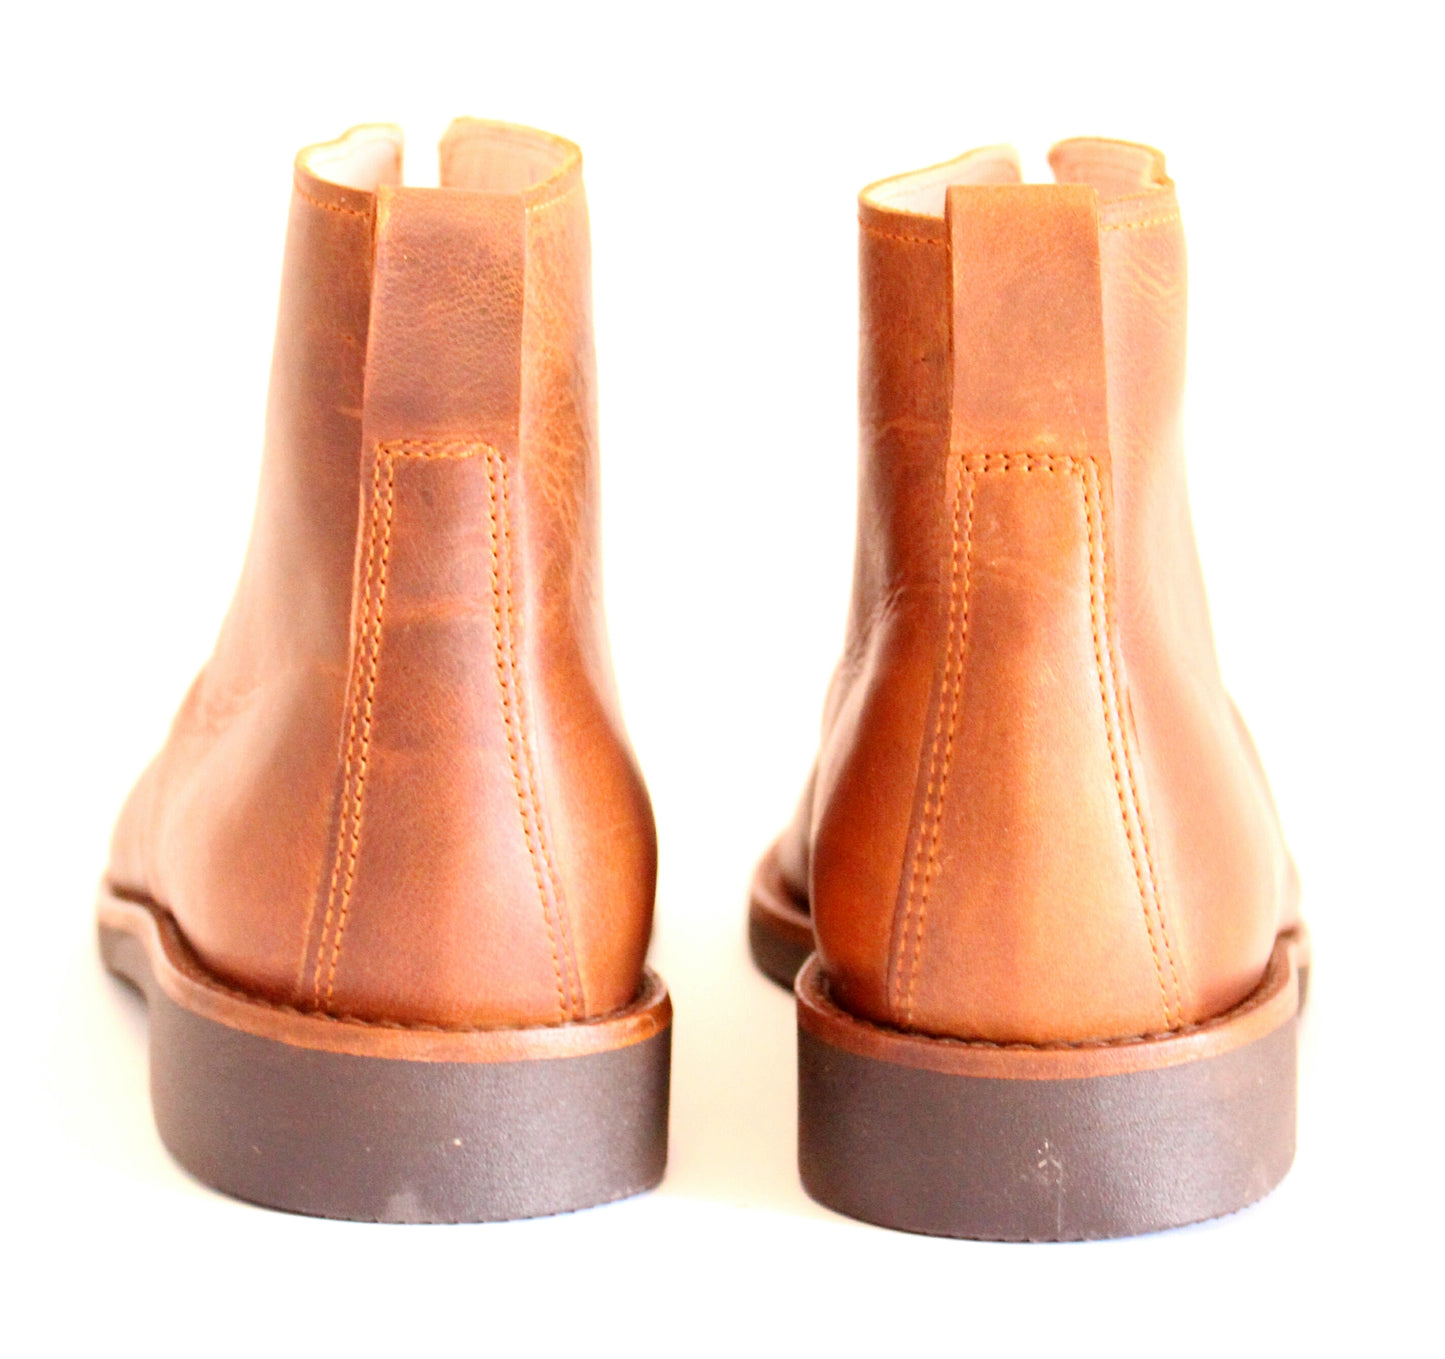 Vouga Boots - OldMulla - Boots Store, Handmade By George